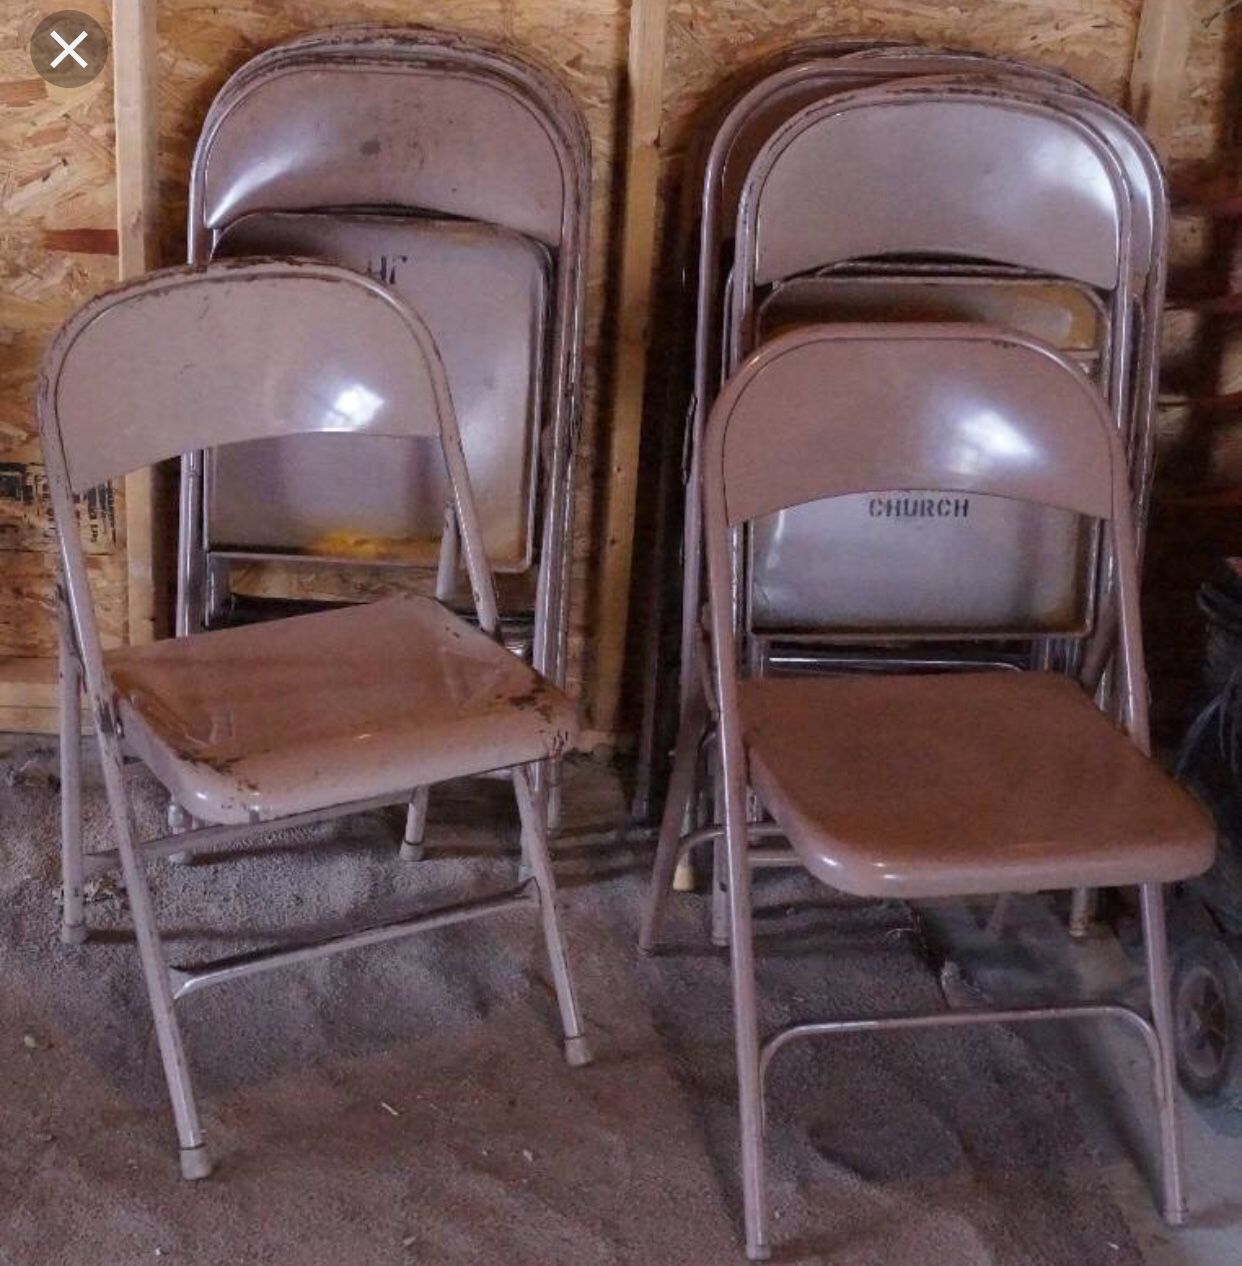 Discolored Metal Folding Chairs (Over 100). $5 each.